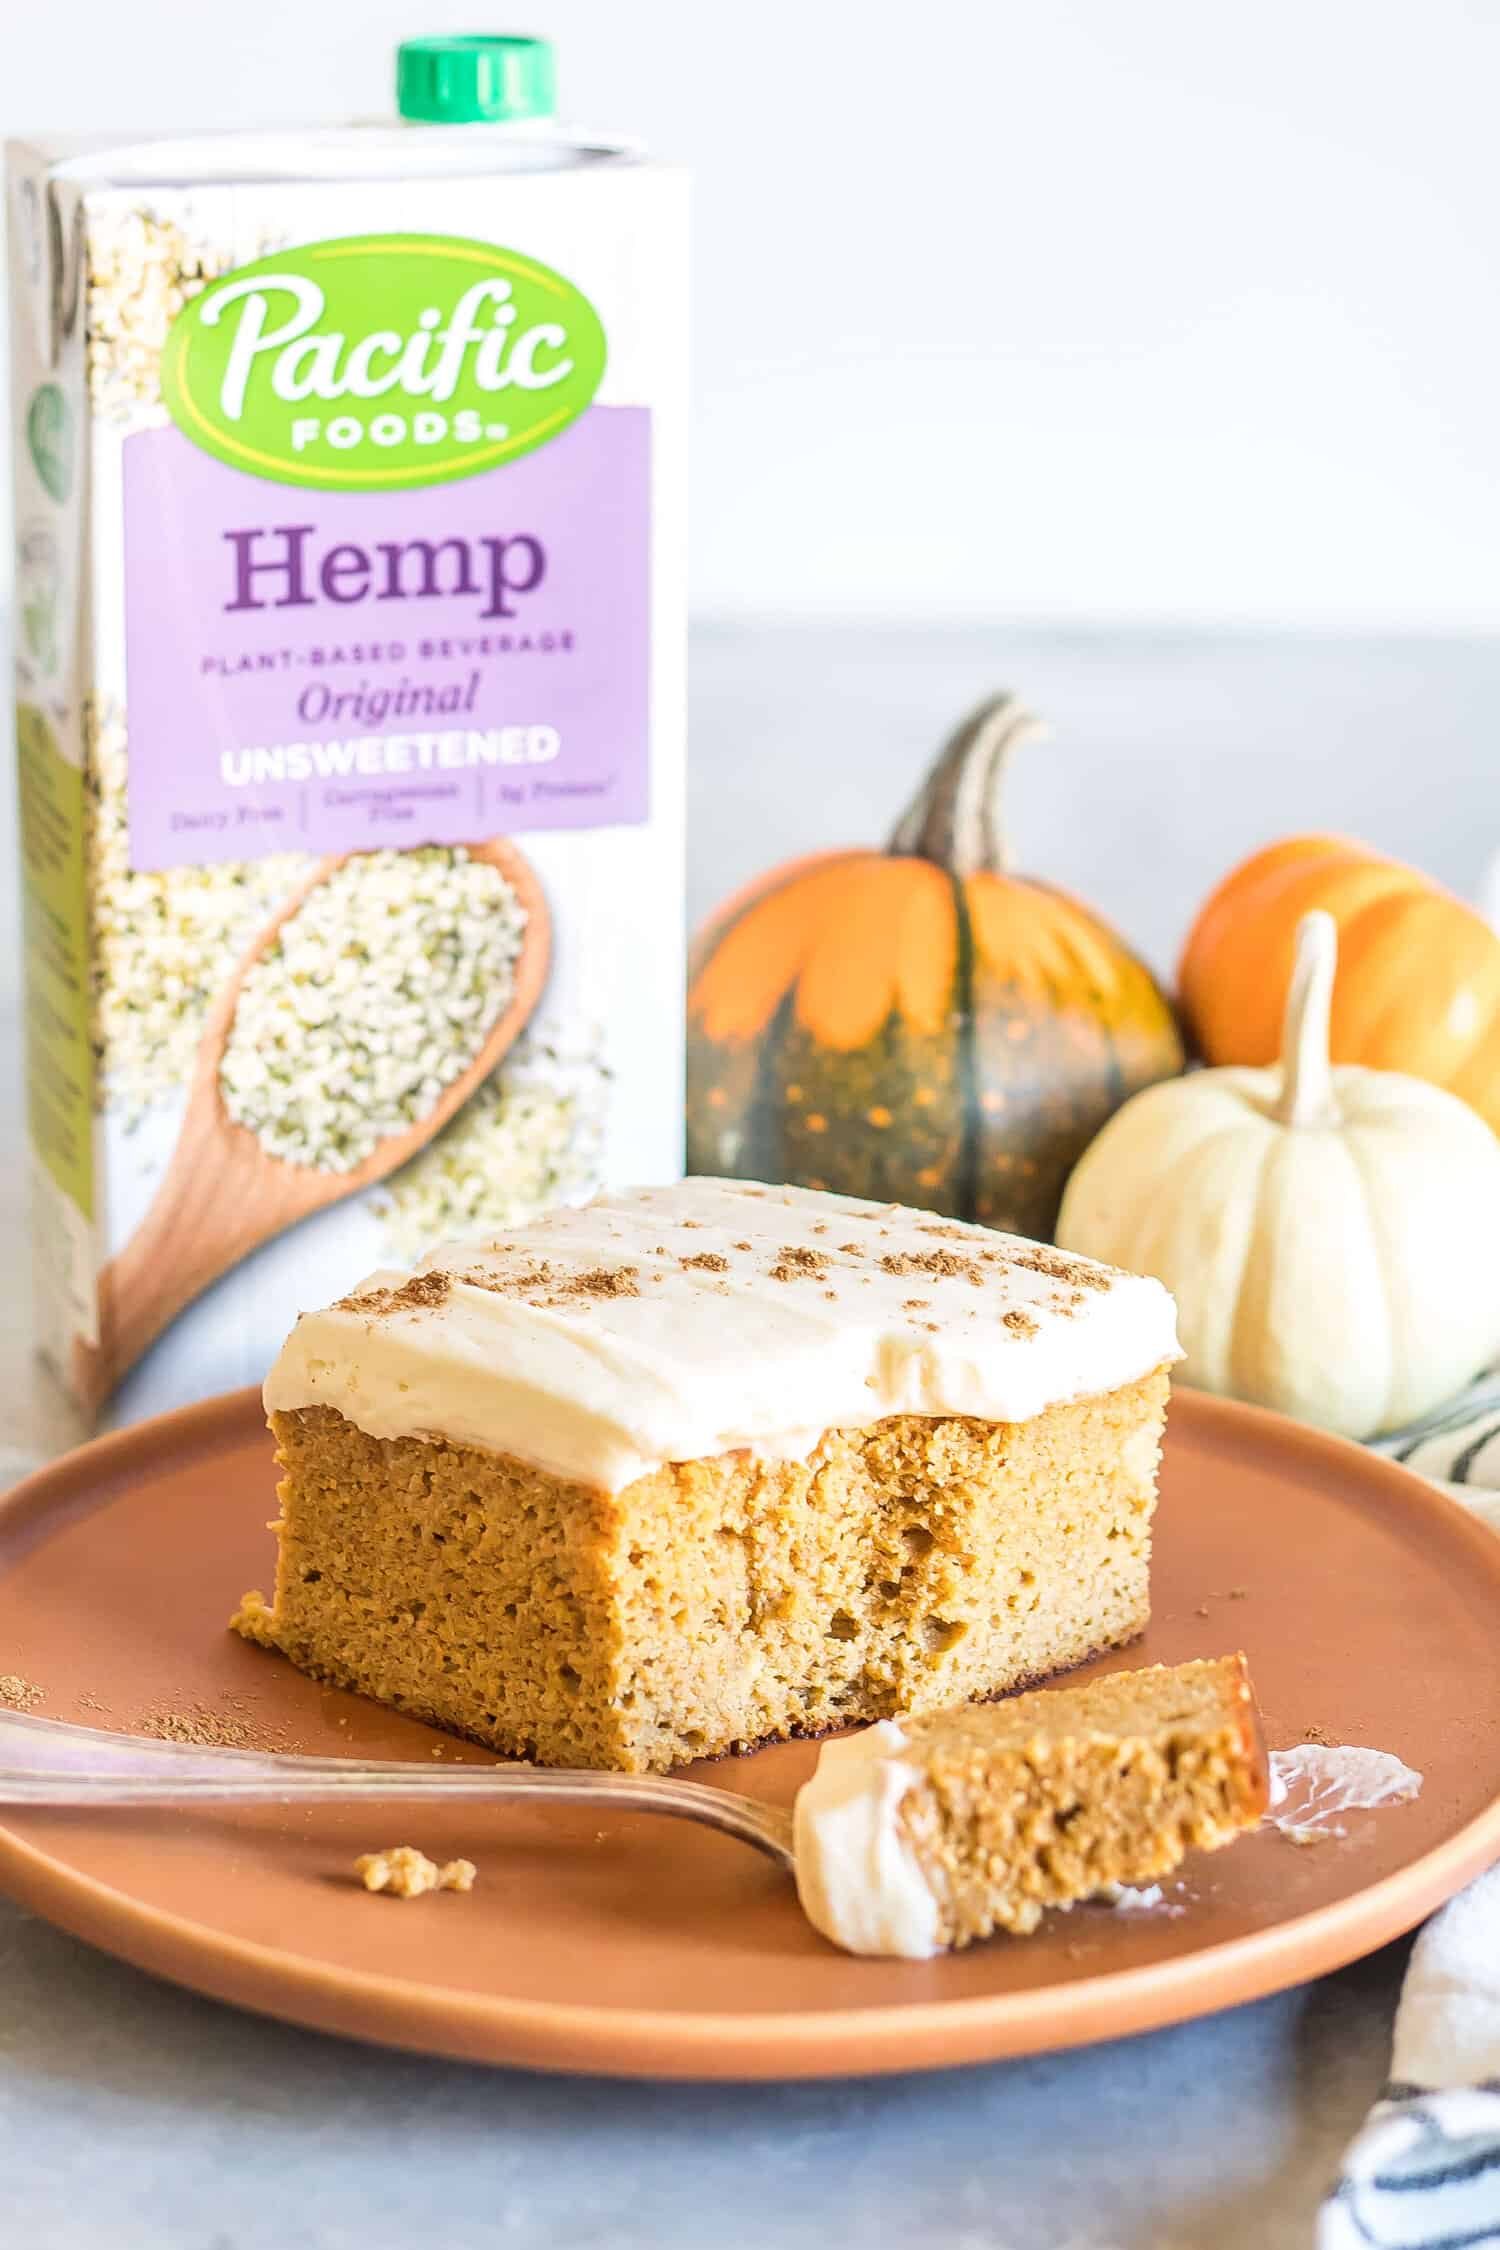 A slice of keto pumpkin spice cake on a plate in front of a carton of pacific foods unsweetened hemp beverage.